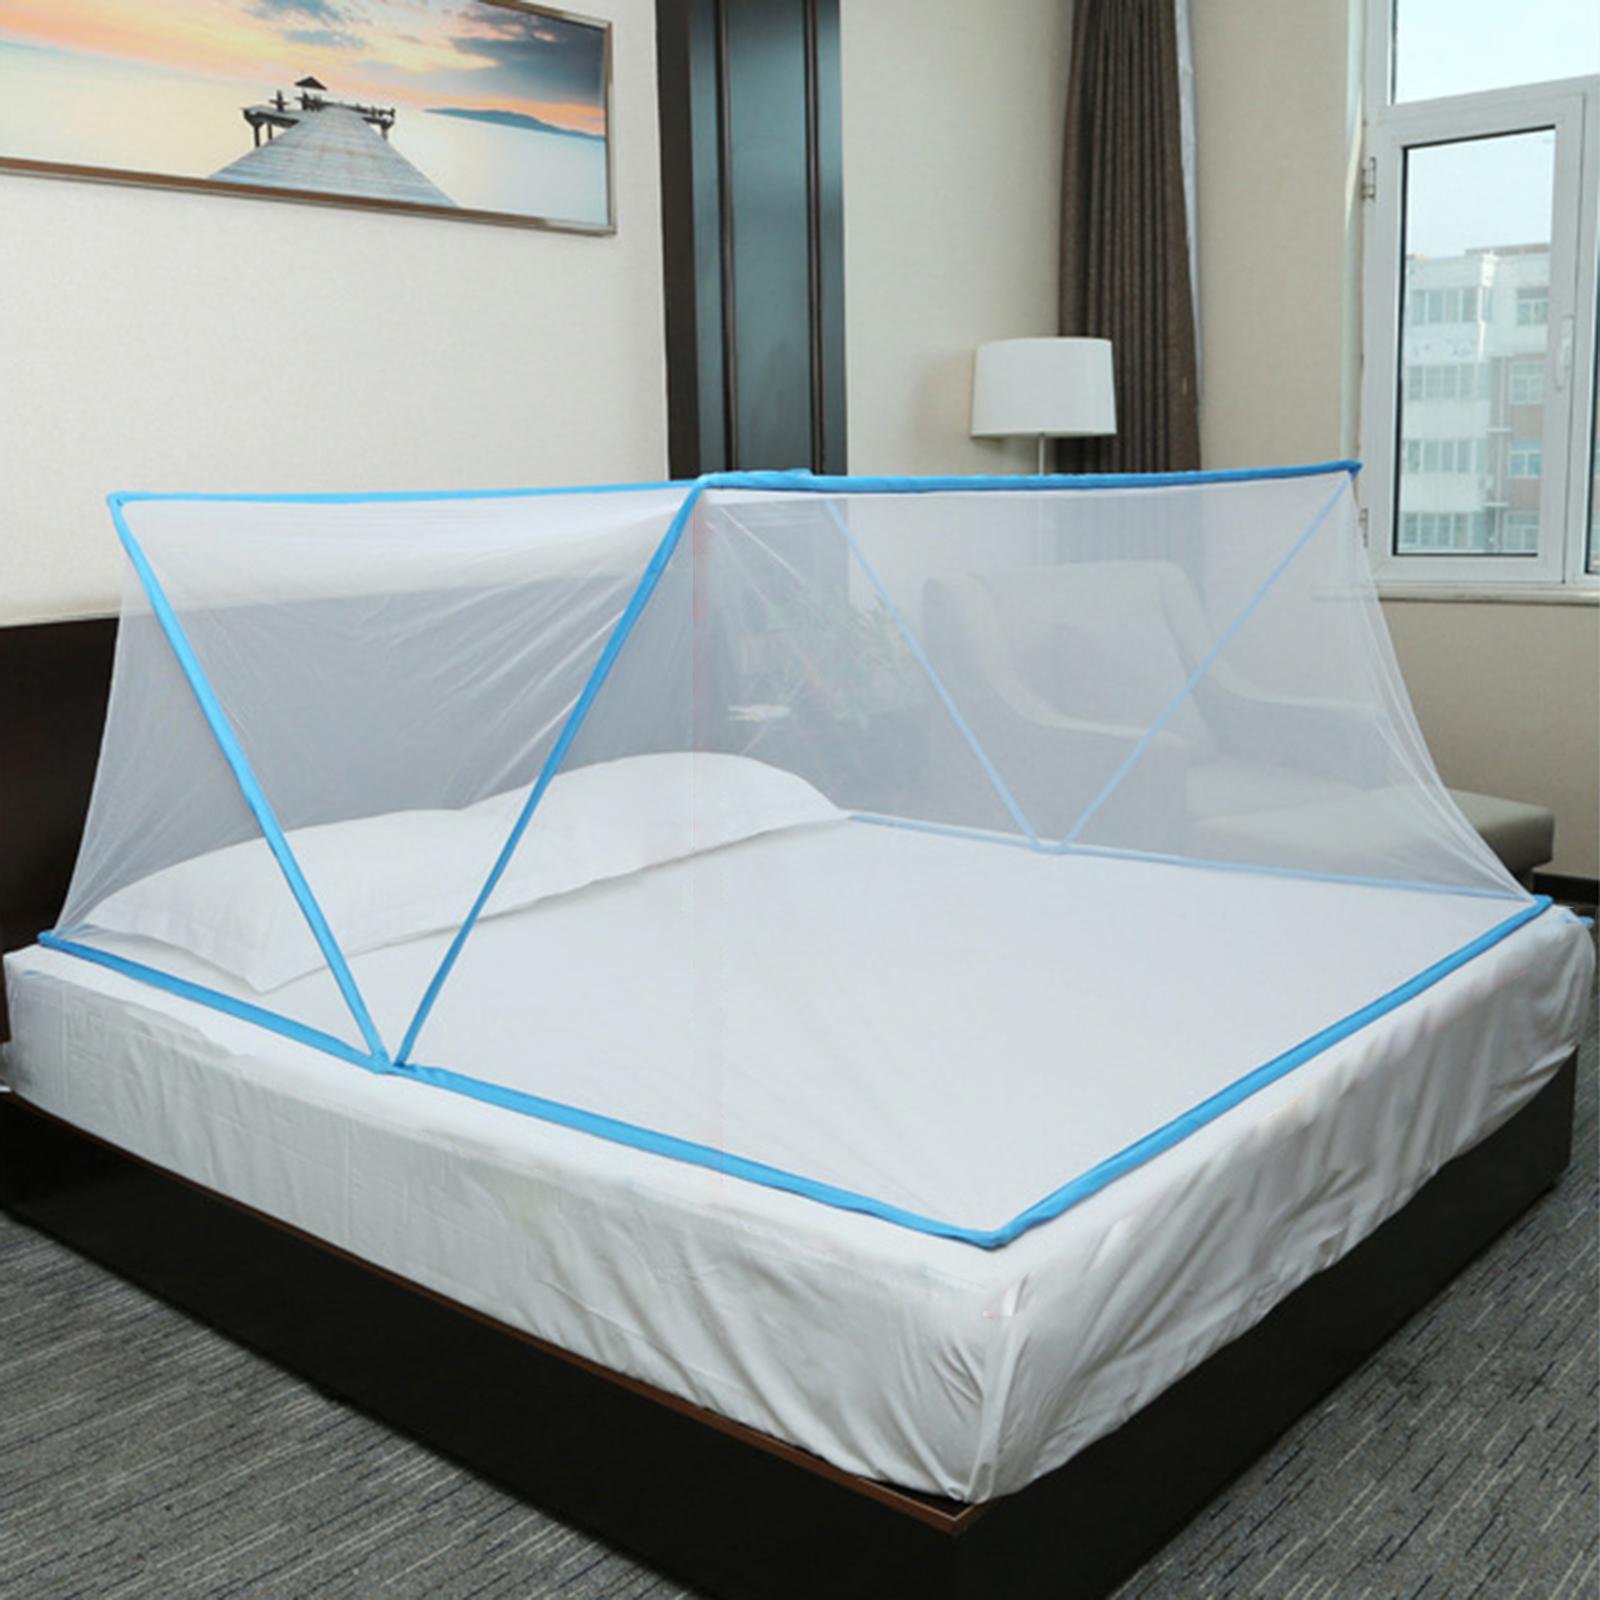 Bed Canopy Foldable Privacy Tents Bed Tent Shelter for Home Dorm Living Room Blue 190x160x80cm